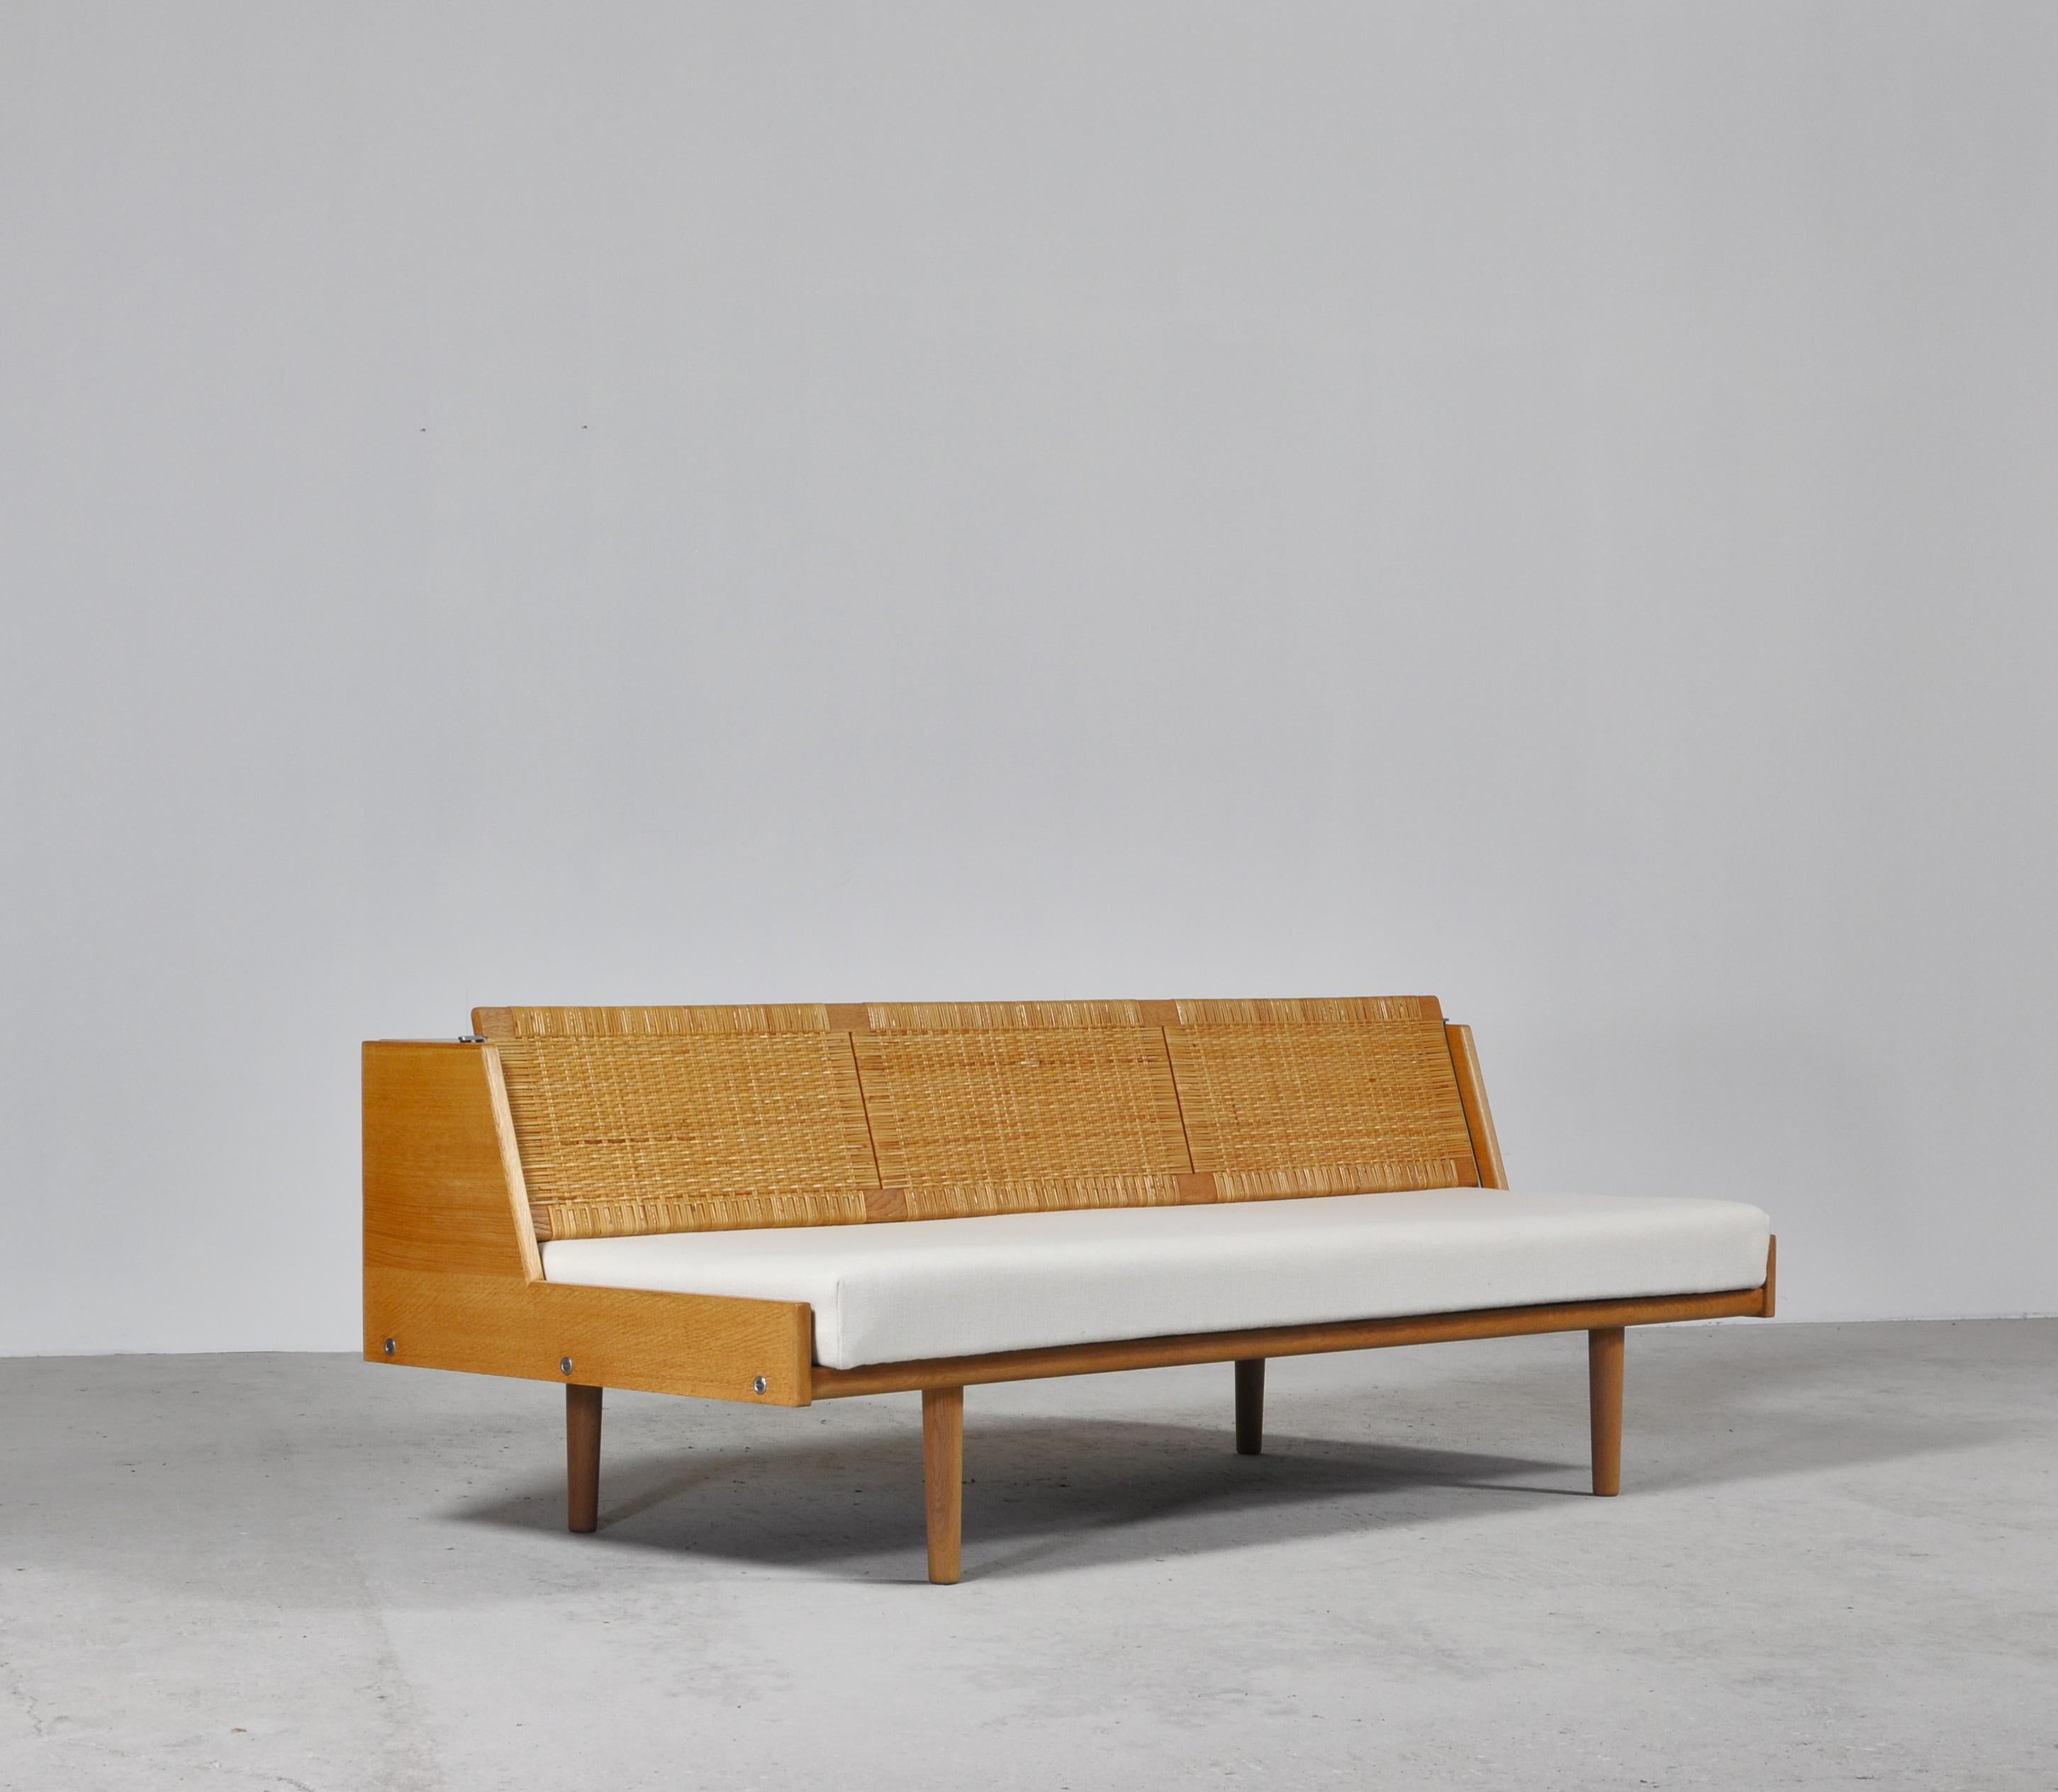 Designed by Hans Wegner for GETAMA this amazing convertible daybed / sofa features a beautifully patinated oak frame and woven cane / rattan back seat which reveals a hidden space for blankets, pillows etc. The model GE-7 was designed by Wegner in